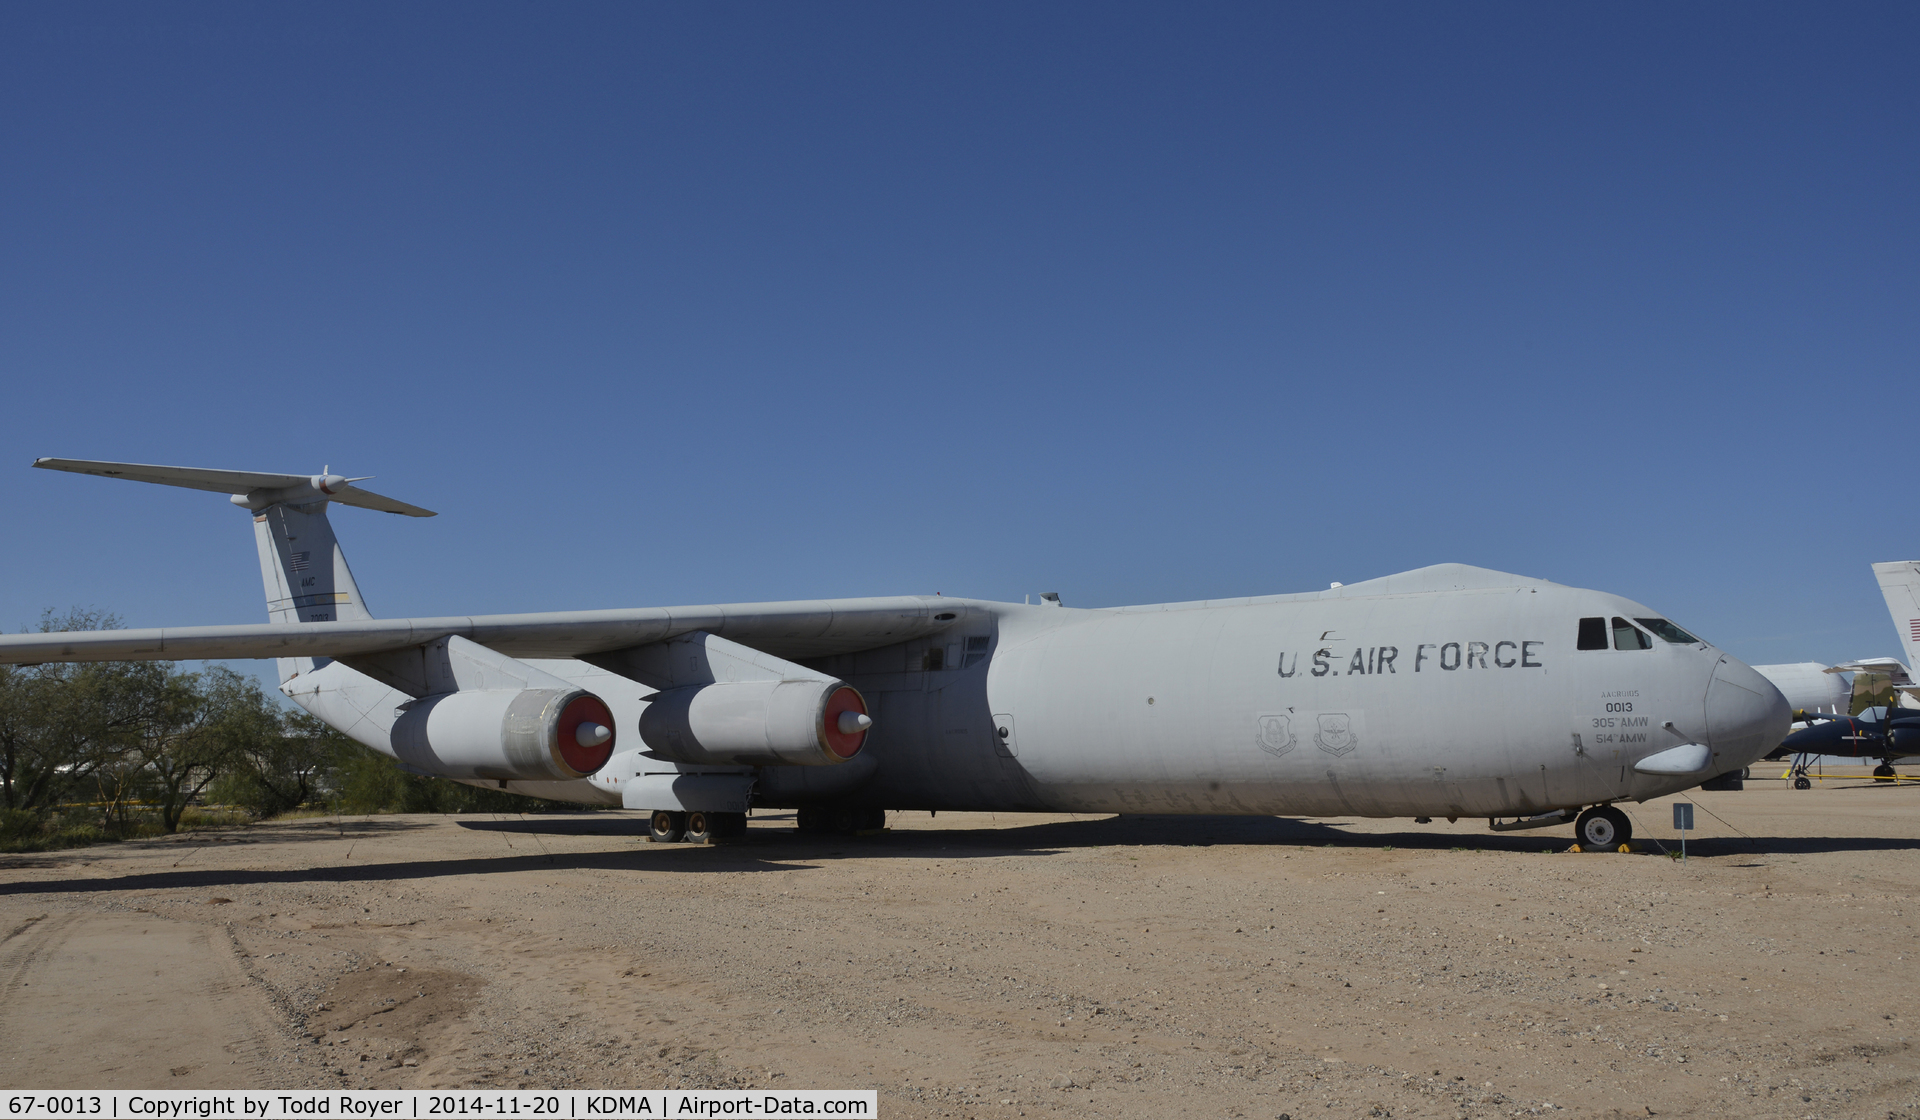 67-0013, Lockheed C-141B Starlifter C/N 300-6264, On display at the Pima Air and Space Museum